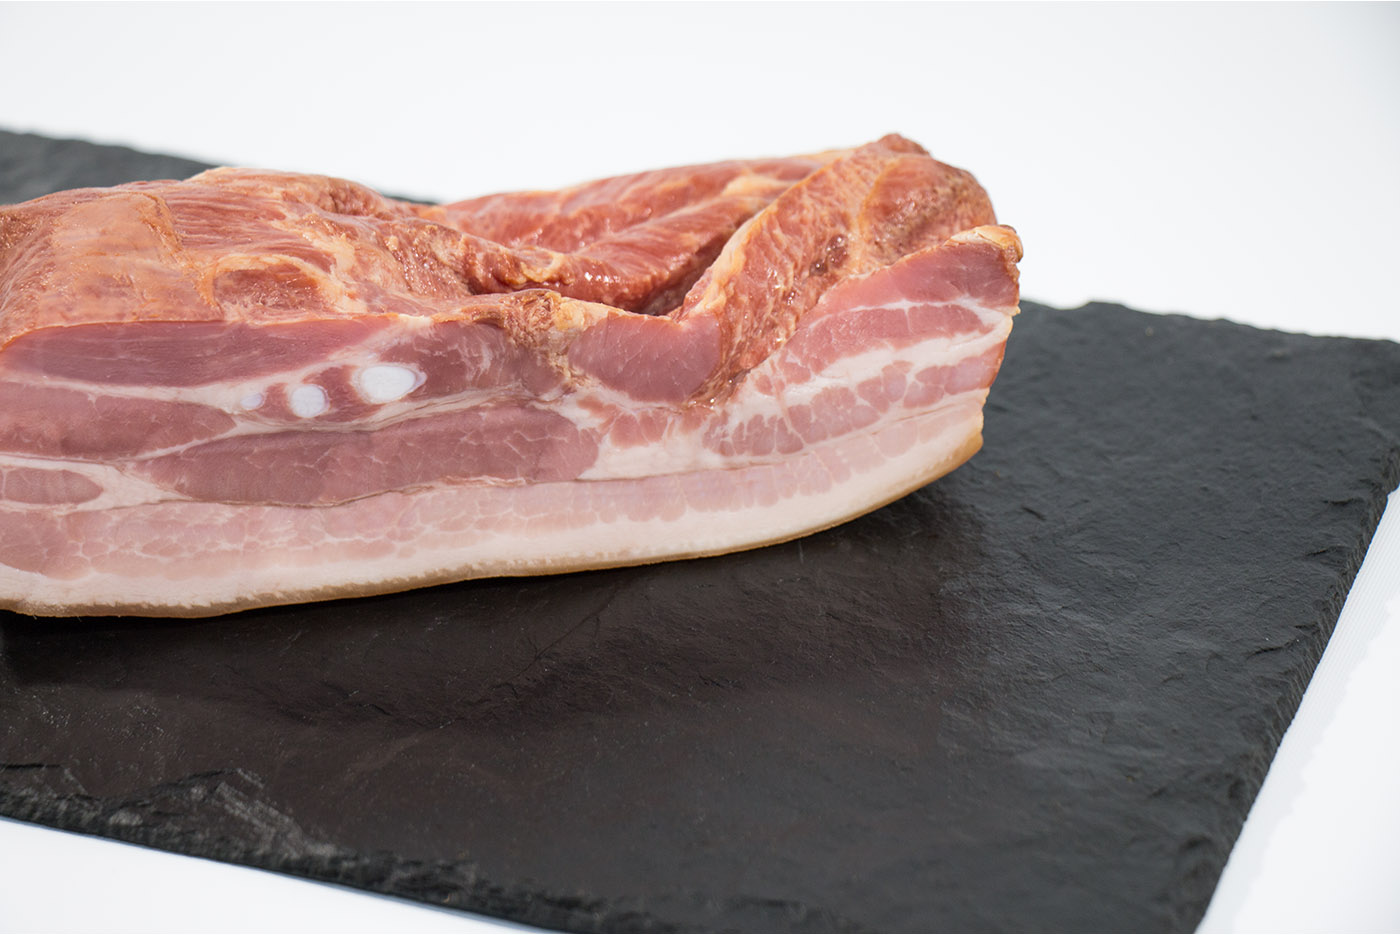 Click to enlarge image 4001_bacon.jpg